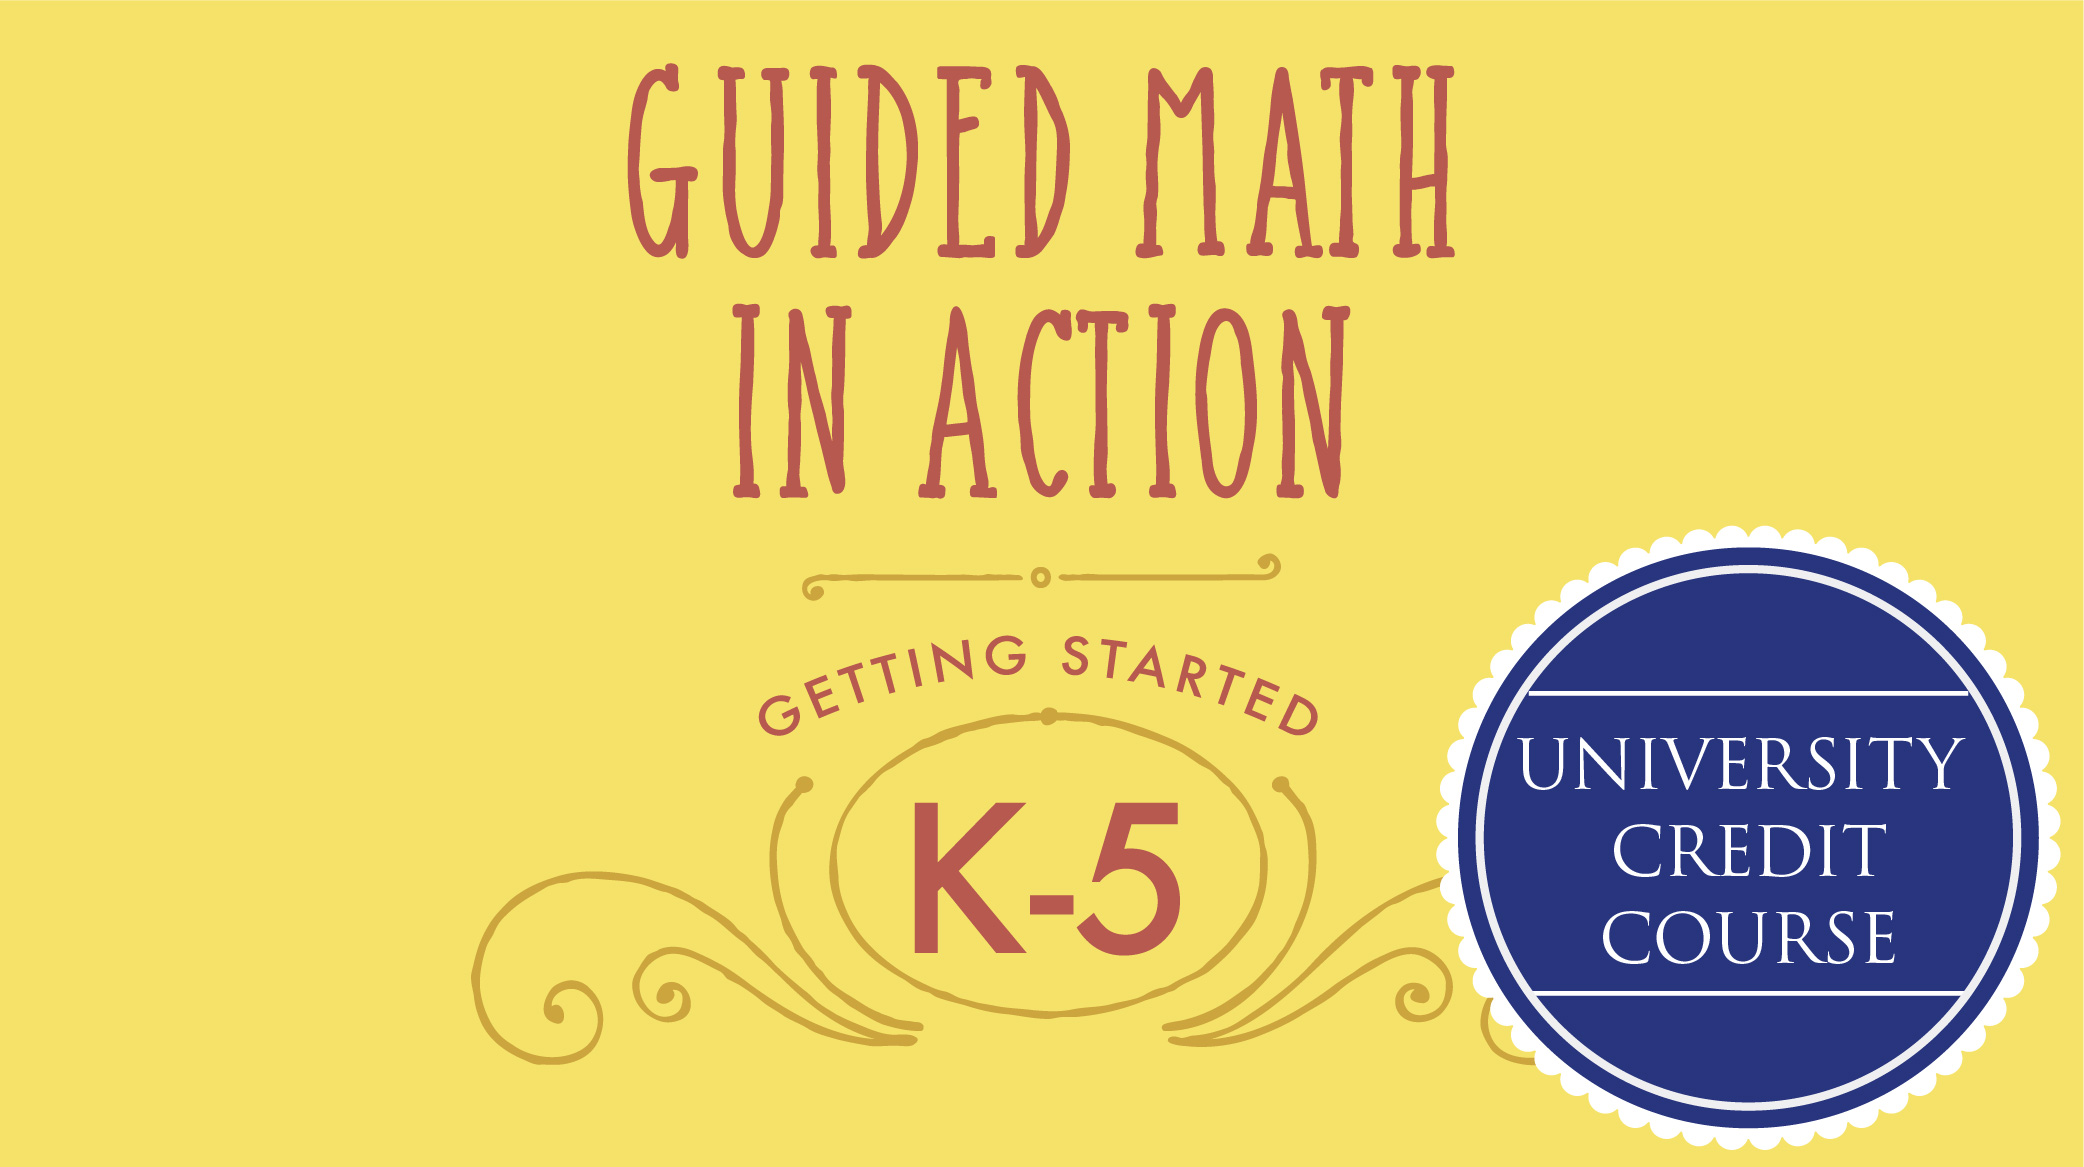 Class-title-cards_Guided math in action K-5 UC